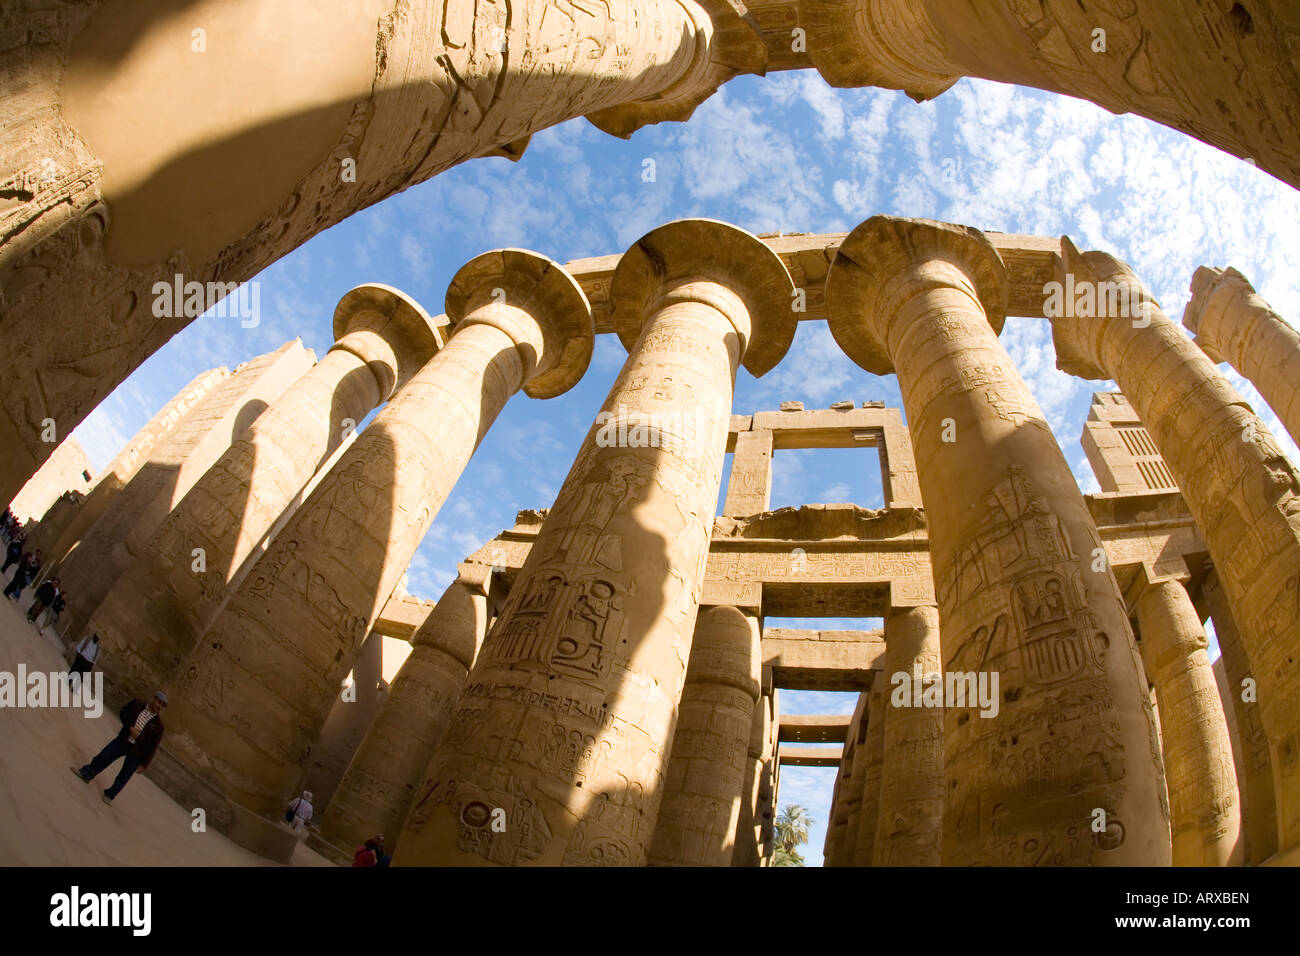 Hypostyle Hall Temple of Amun Karnak UNESCO World Heritage Site in Luxor Egypt North Africa Stock Photo